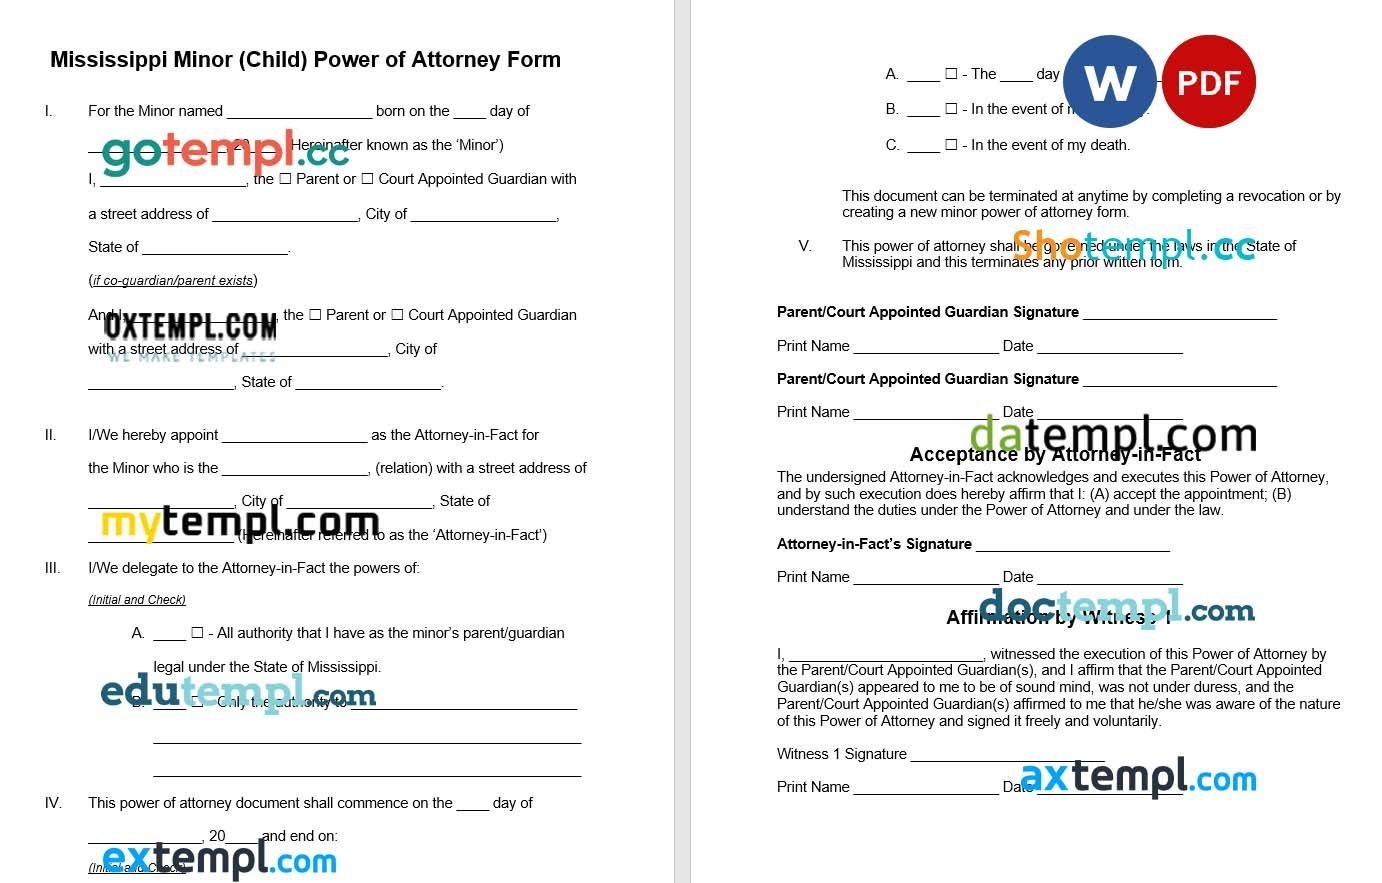 Mississippi Minor Child Parental Power of Attorney example, fully editable